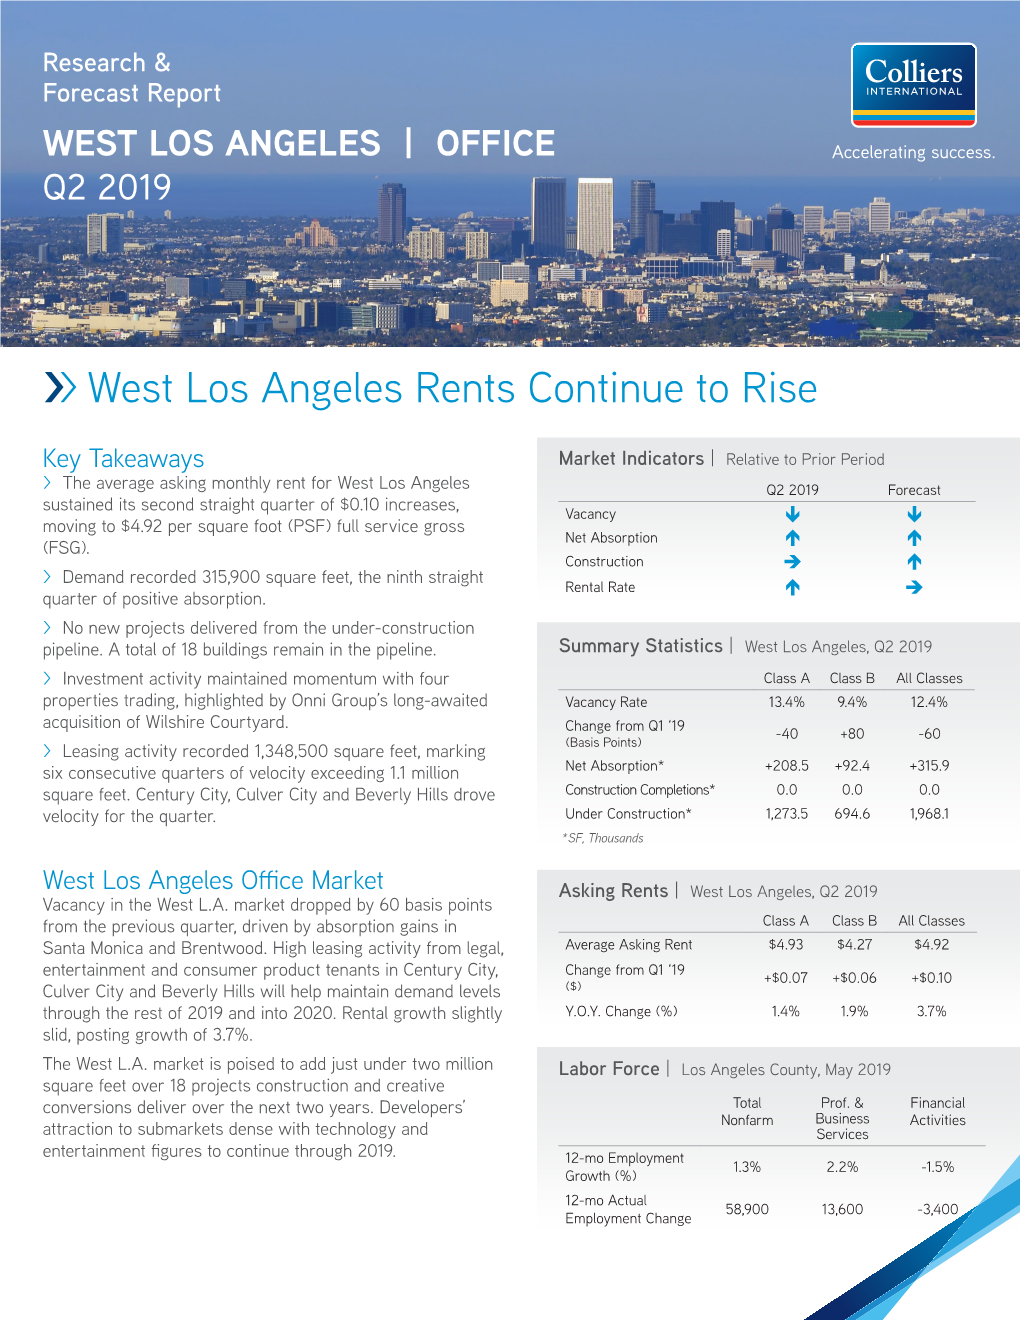 West Los Angeles Rents Continue to Rise